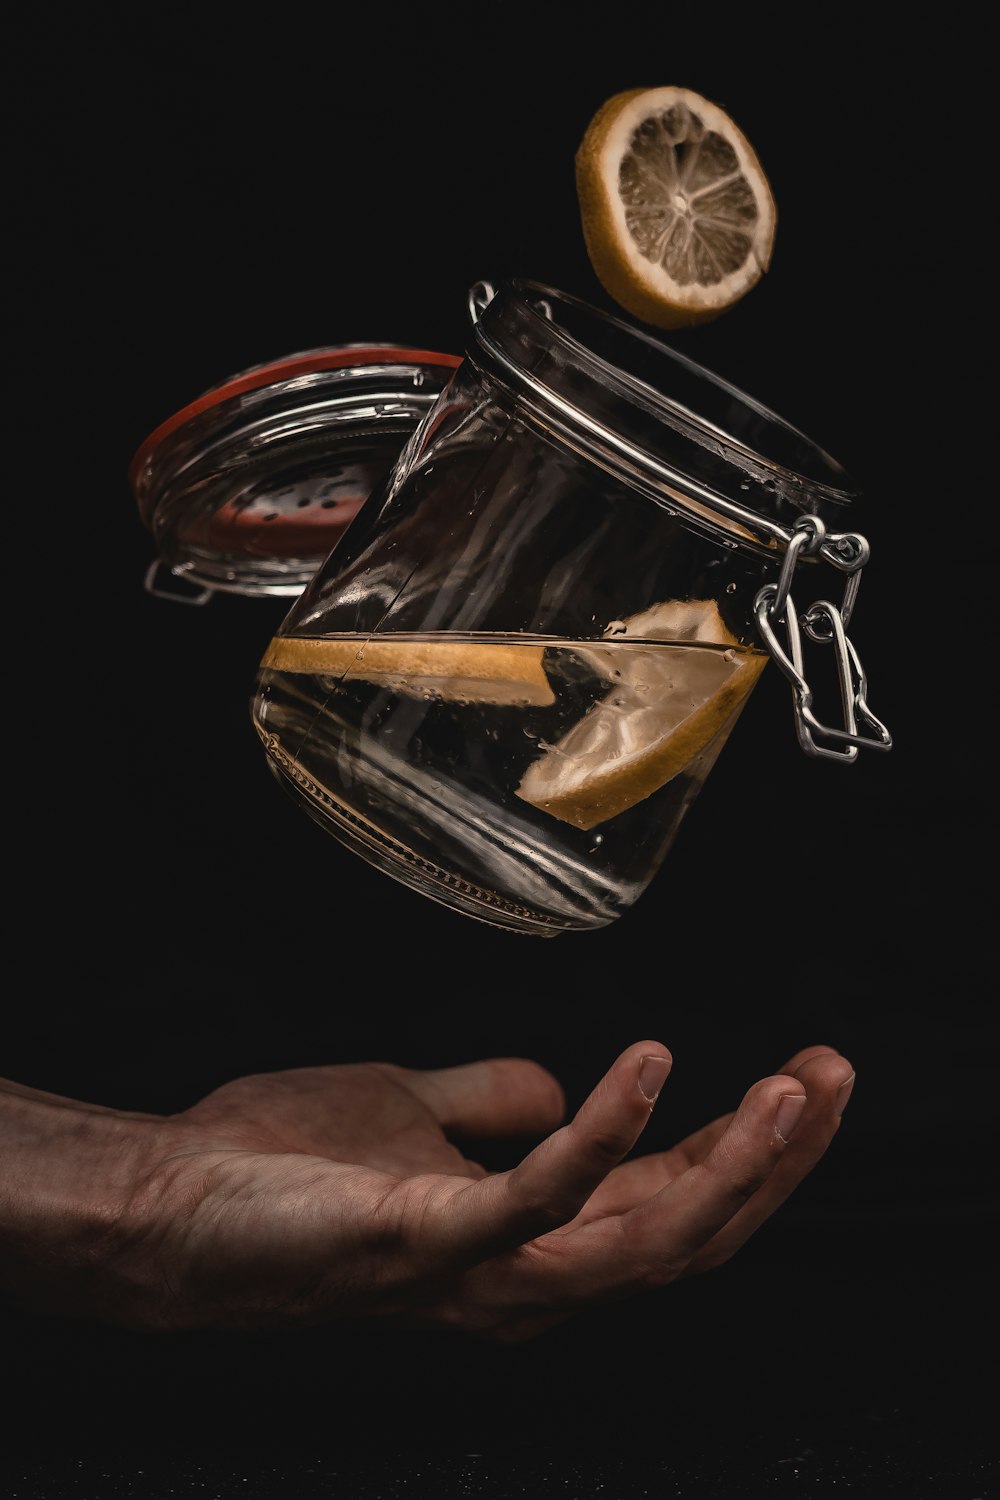 clear glass jar with water and sliced lemon over person's hand